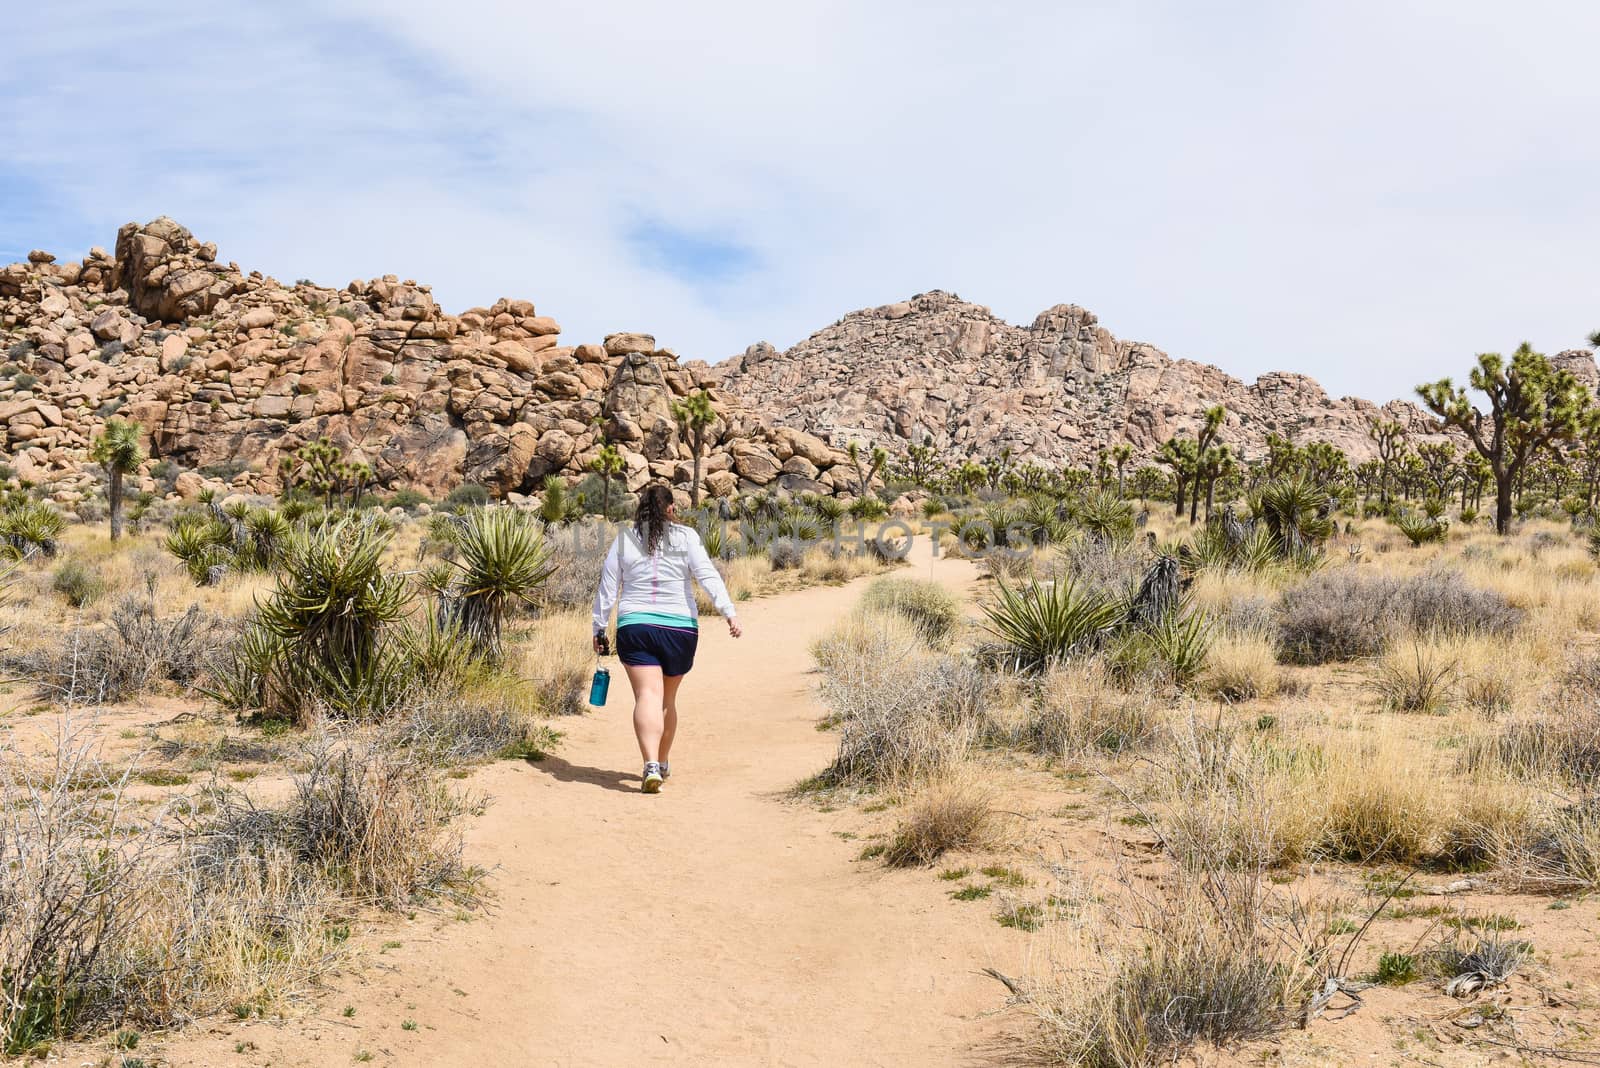 Hiker on Boy Scout Trail in Joshua Tree National Park, Californi by Njean